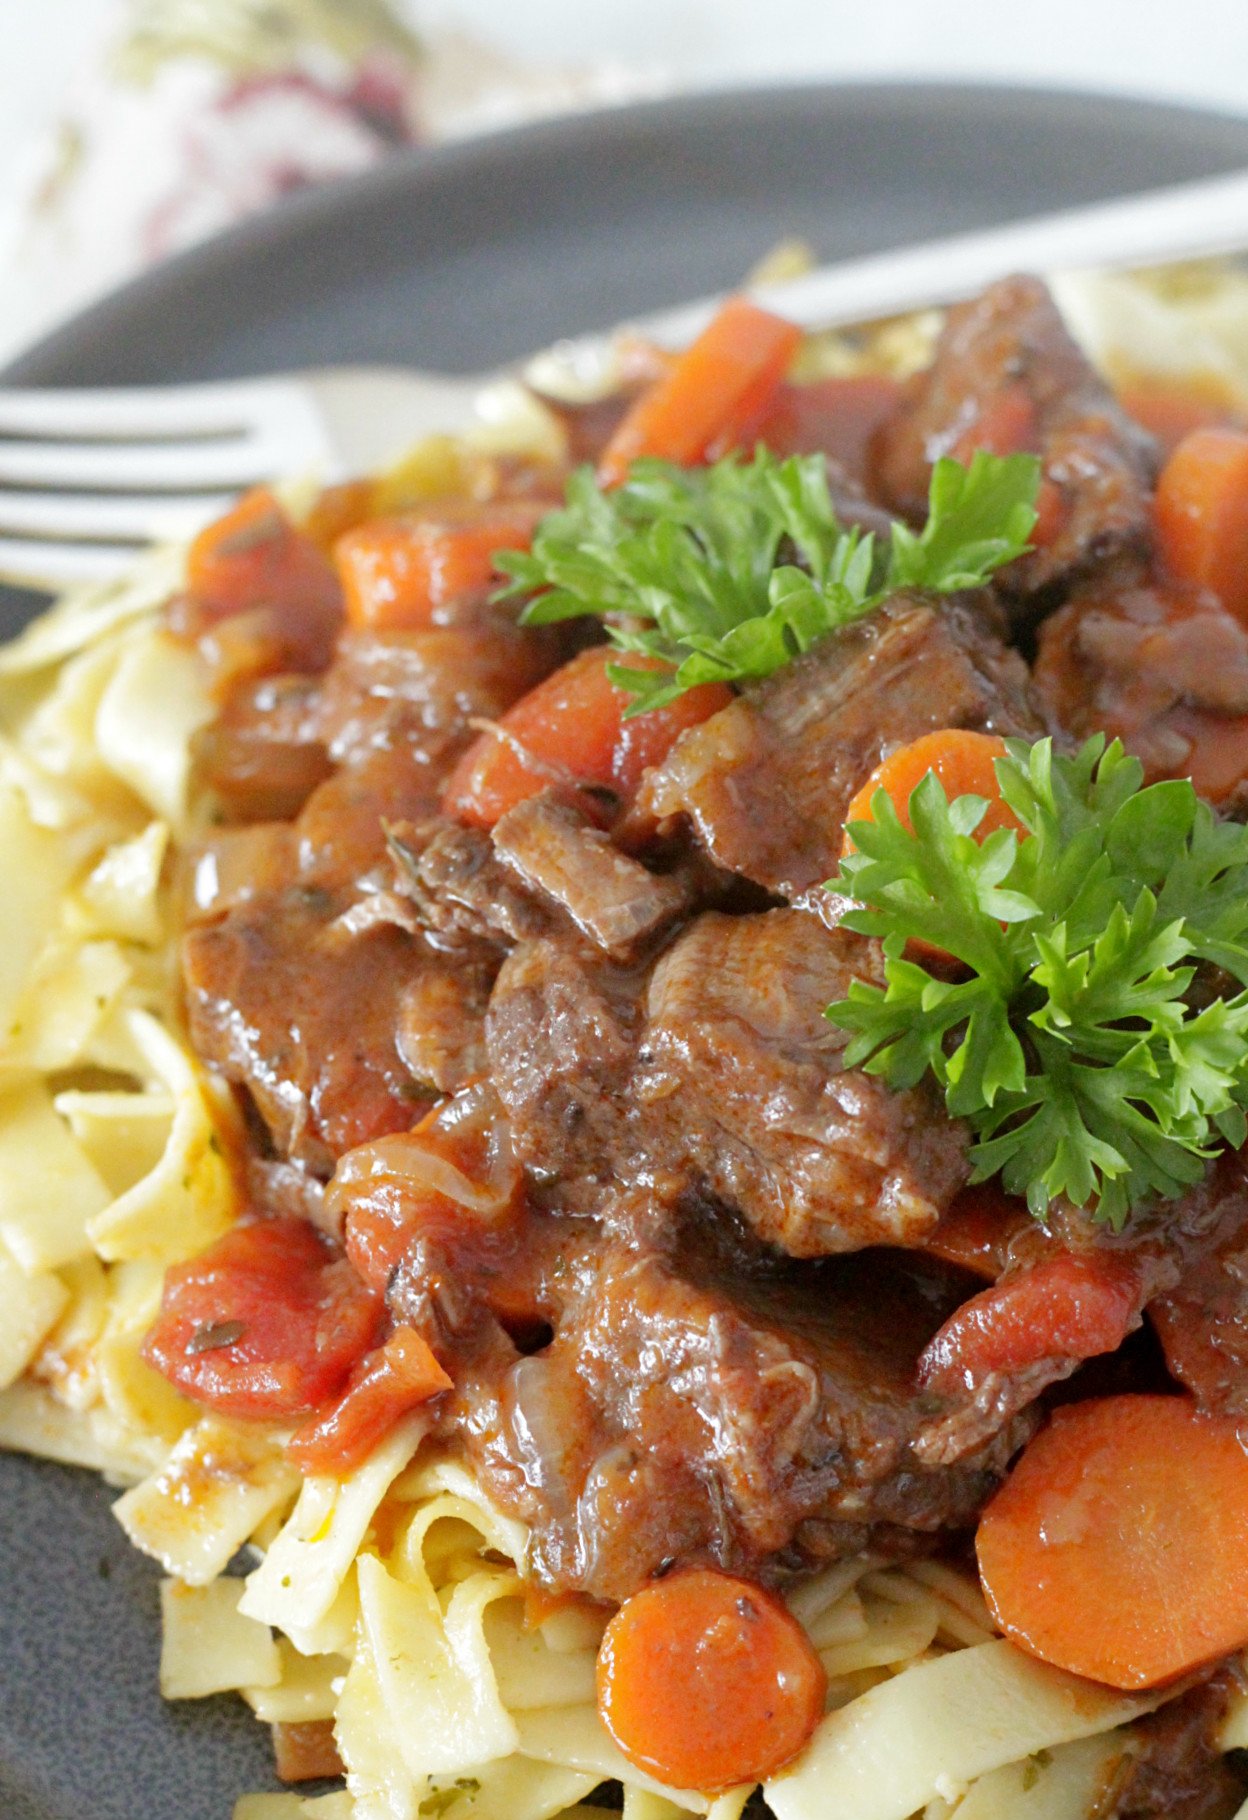 provencal beef stew plate